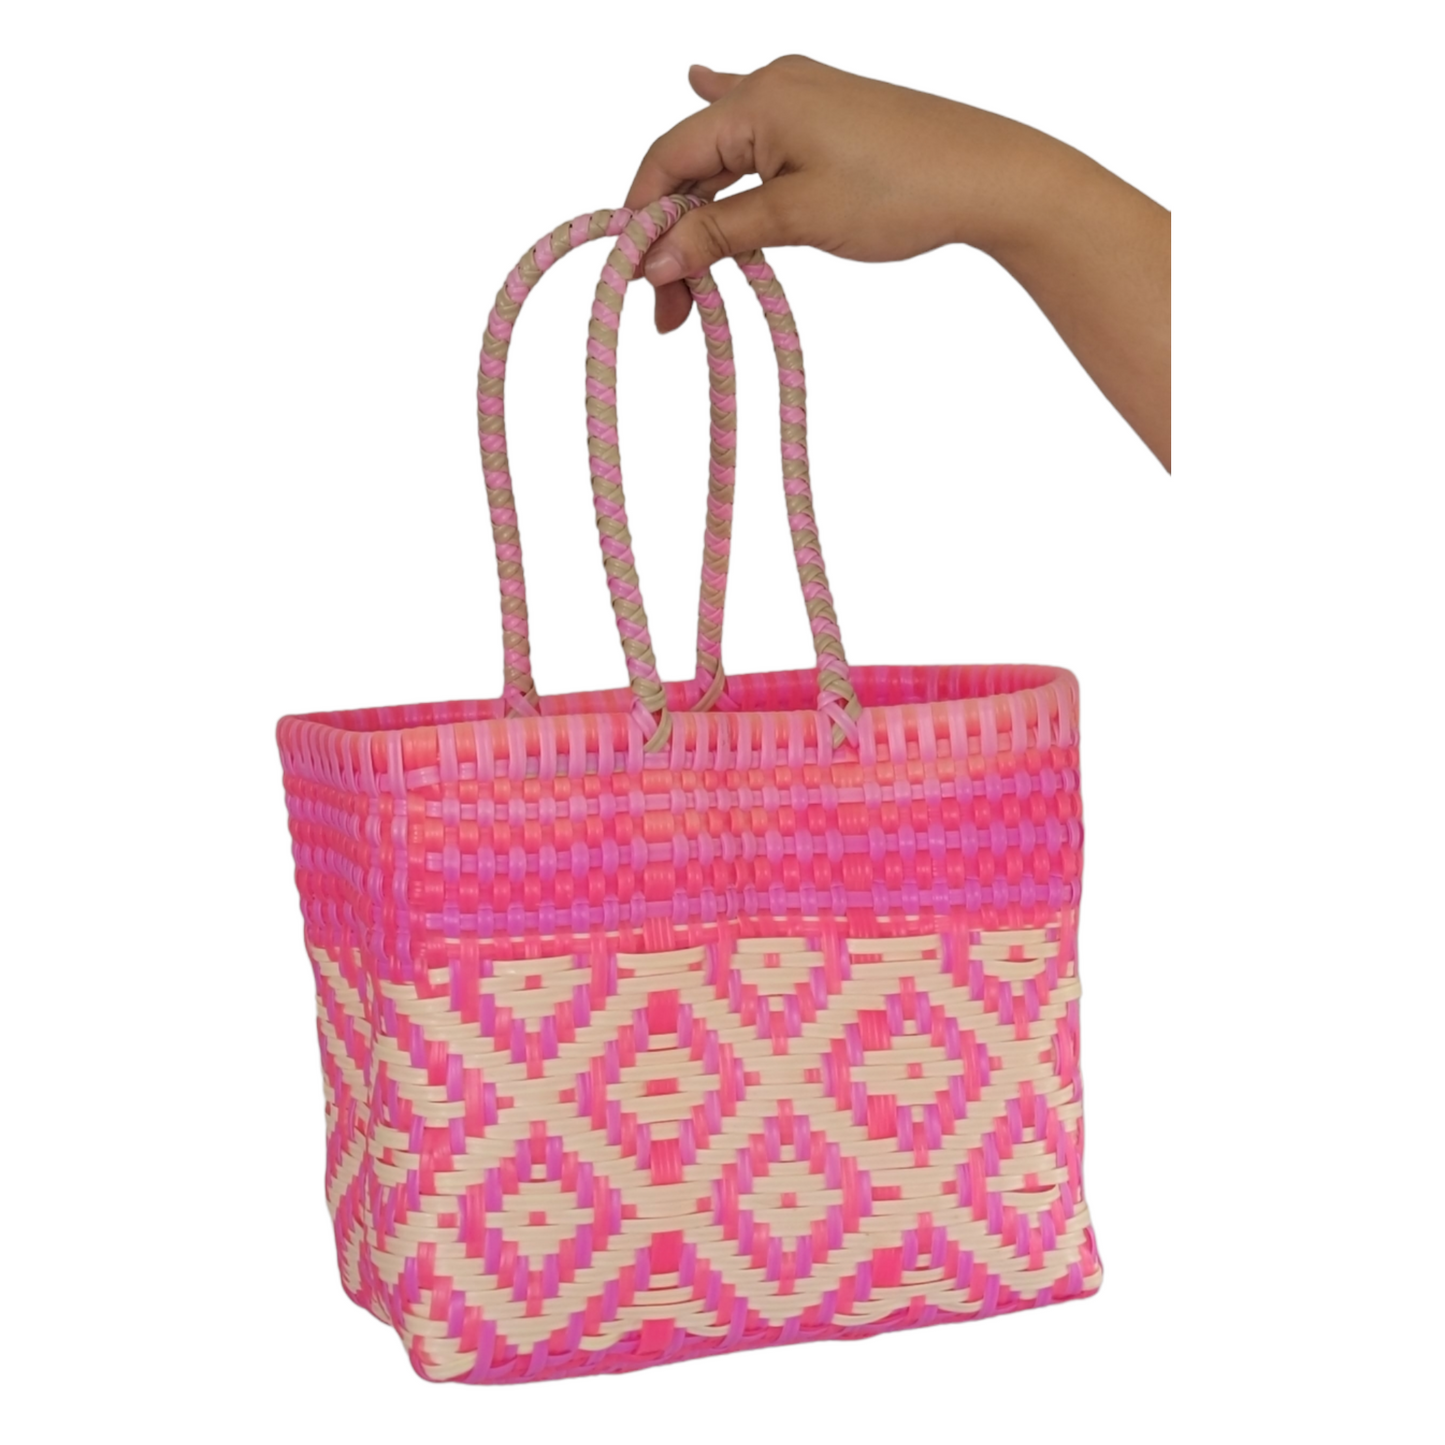 Barbie Mini Tote | Handwoven recycled